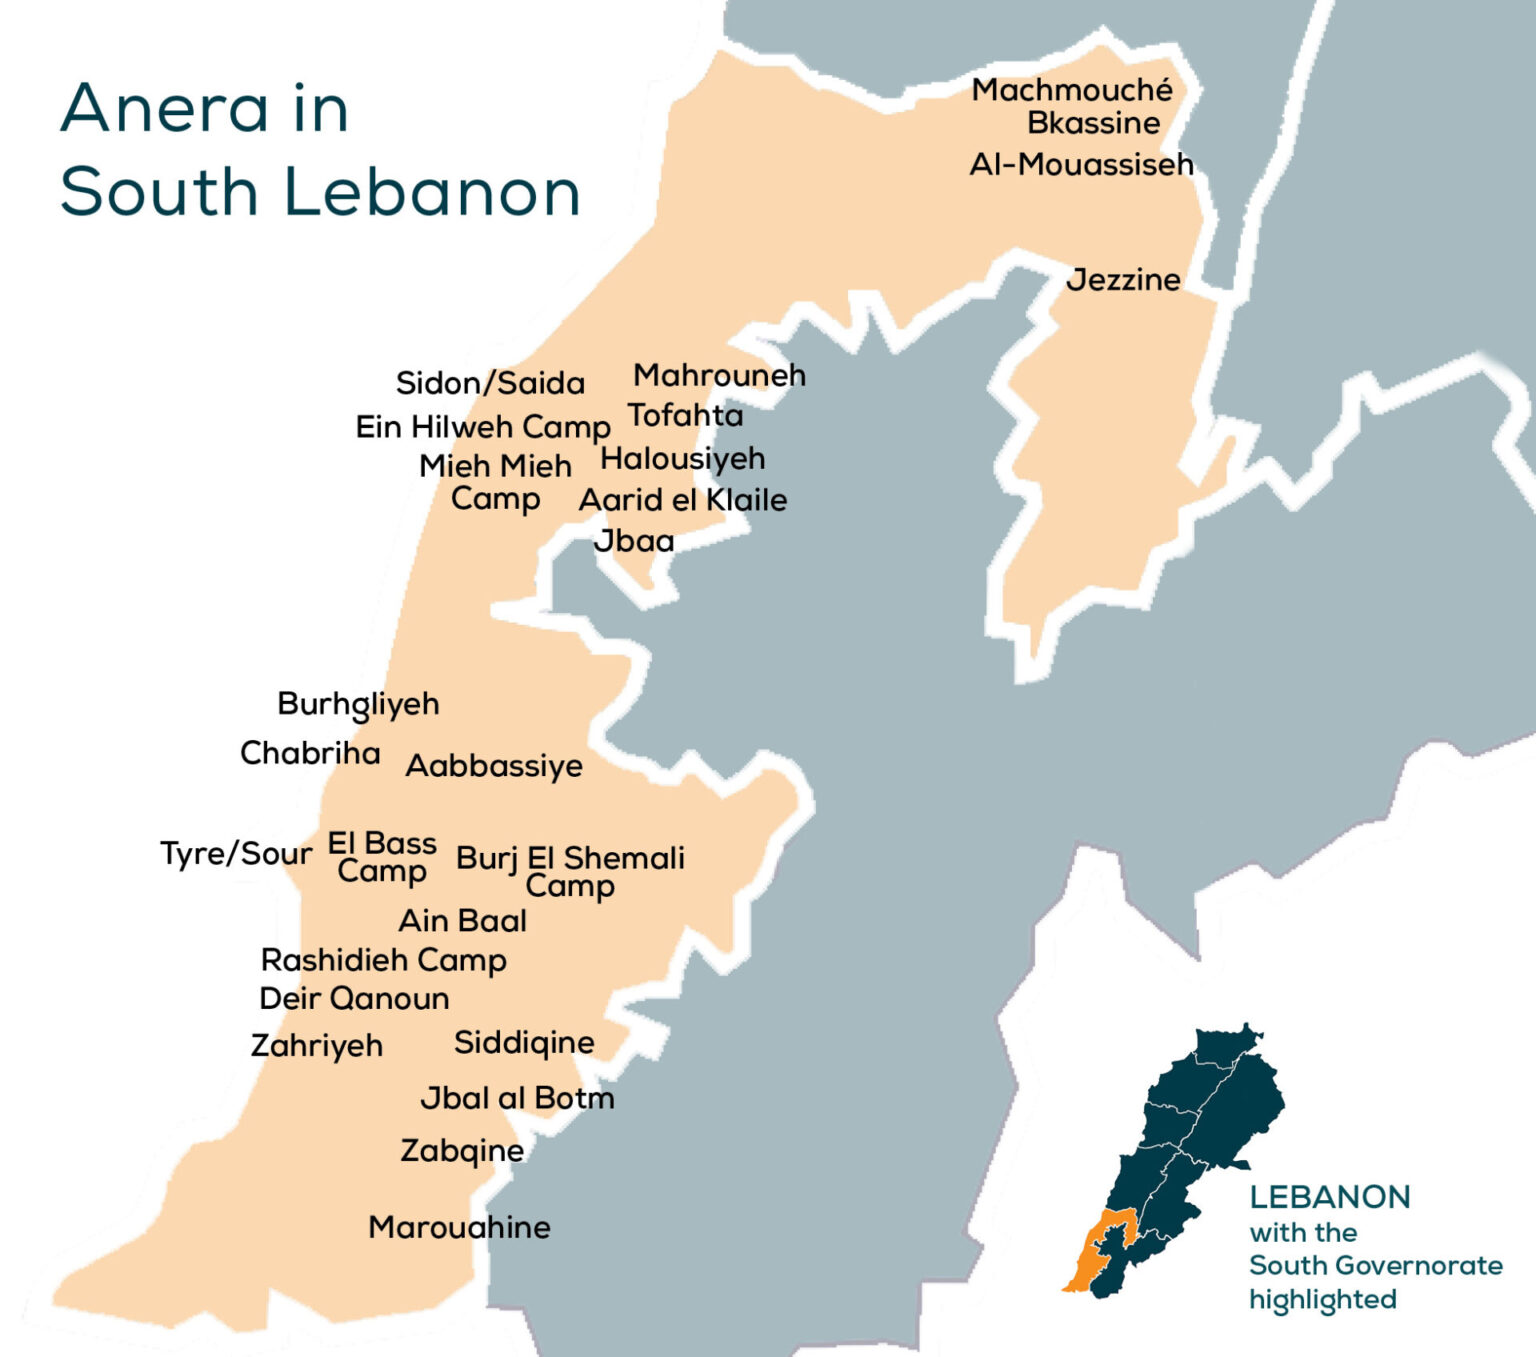 Locations shown on a map of where Anera has worked in the South Governorate of Lebanon.